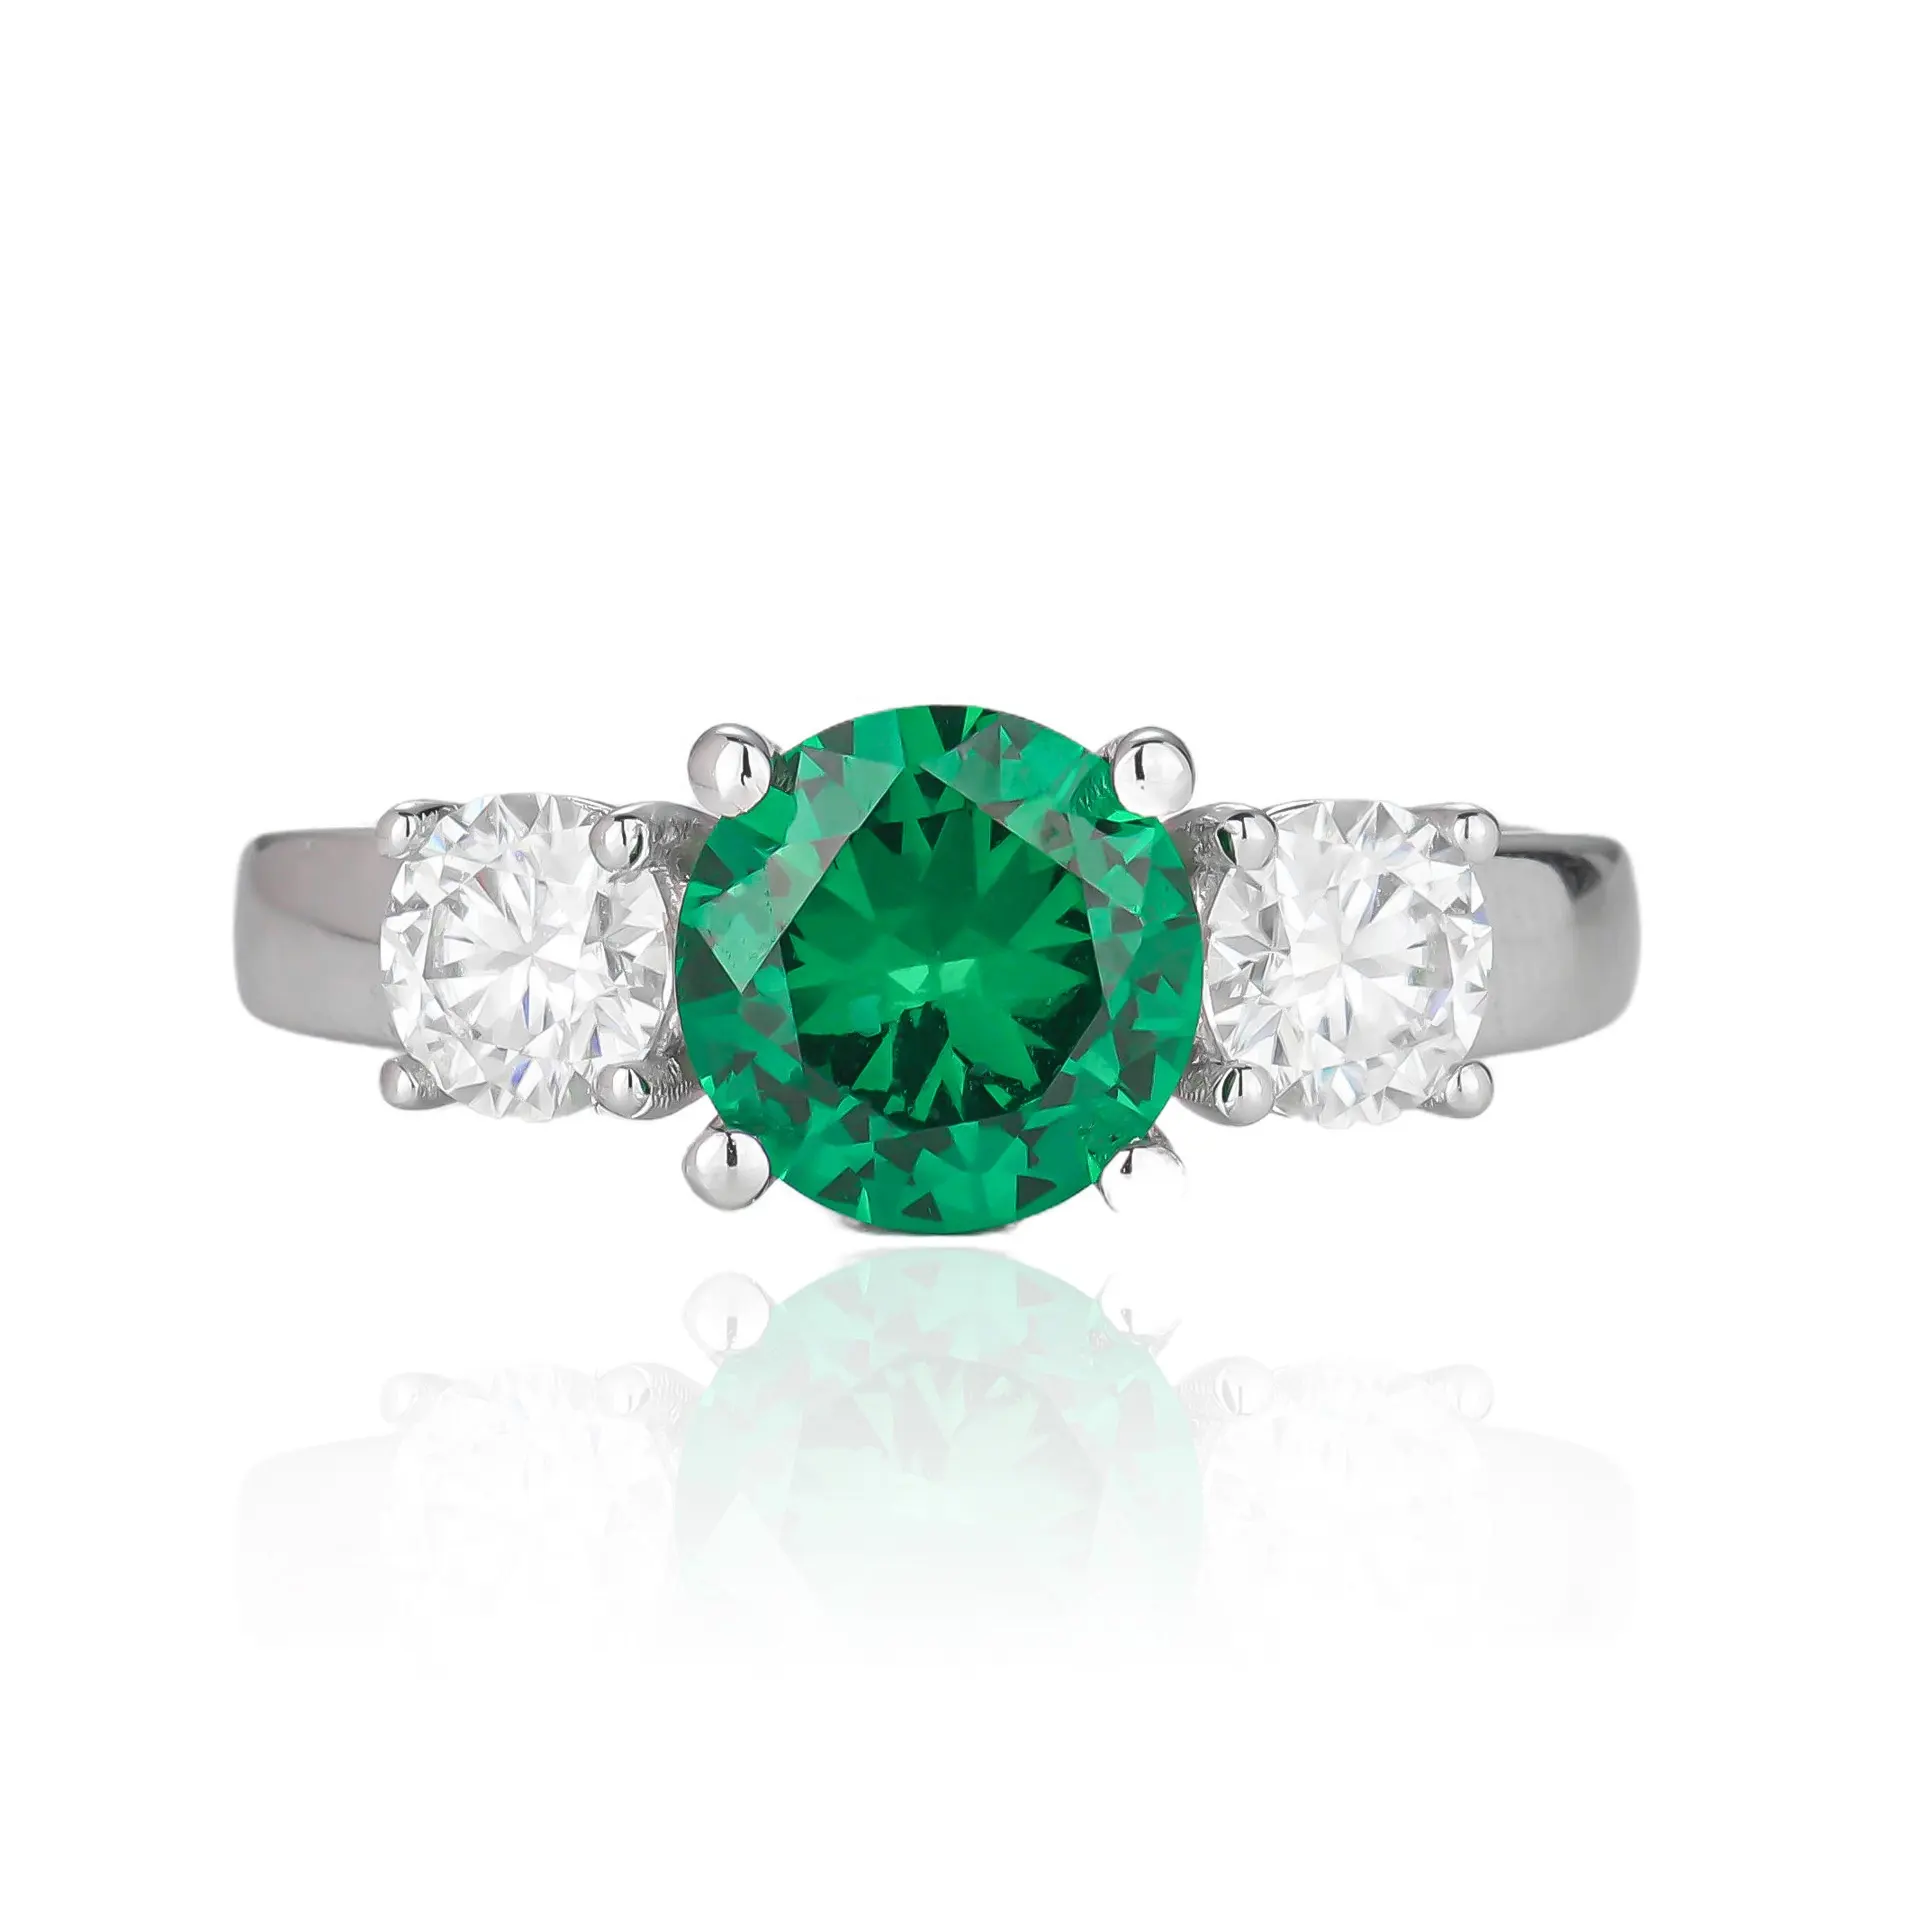 DEYIN New Arrival Fashion Jewelry 925 Silver 2.28ct Colombian Green Emerald Stone Ring Ladies